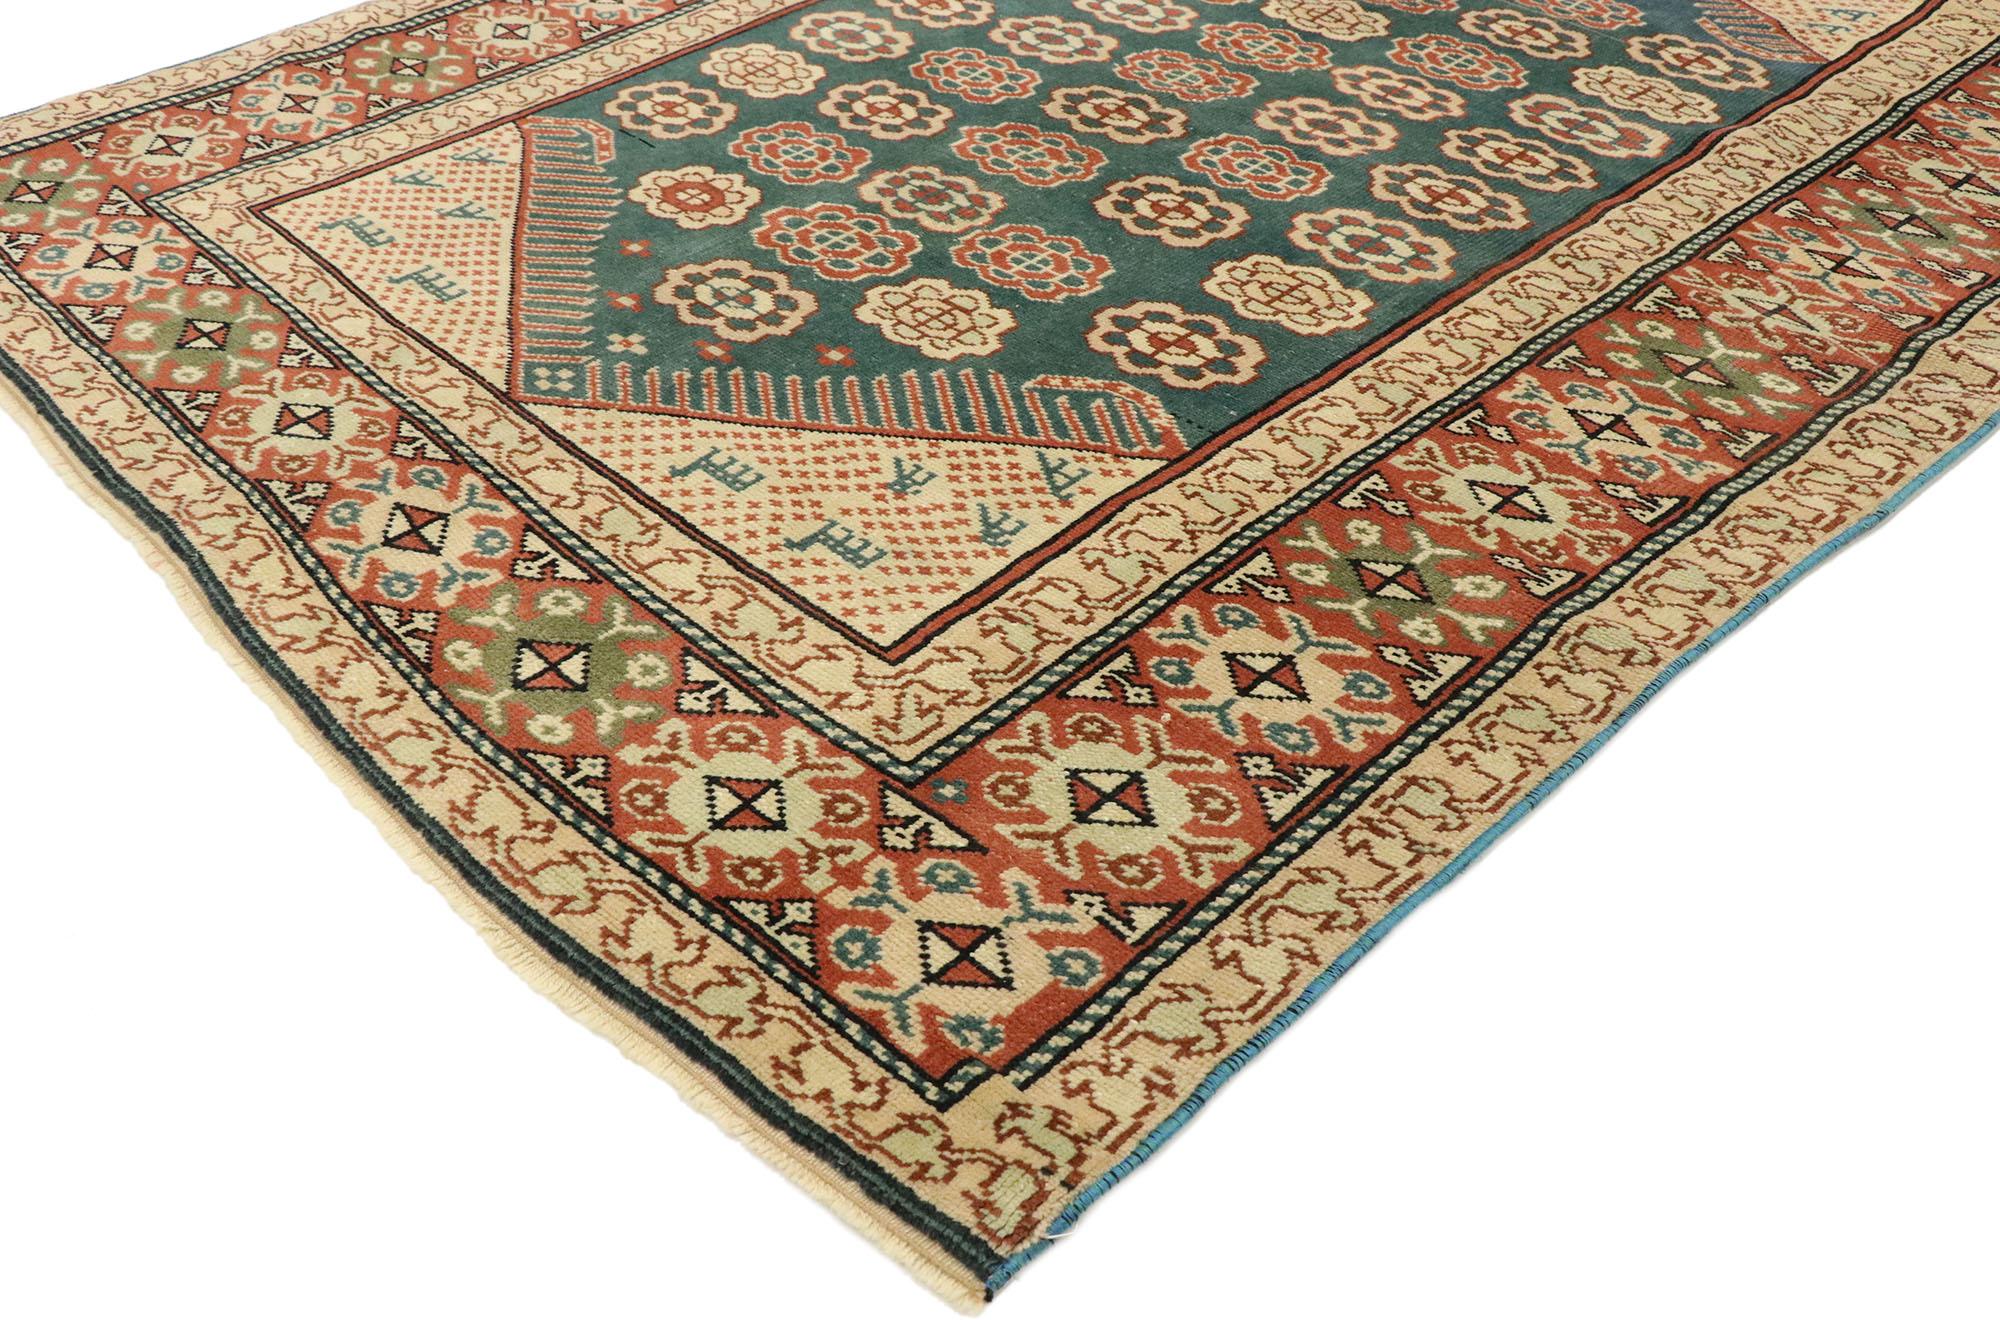 53042, antique Turkish Oushak rug with American Colonial styl. Displaying well-balanced symmetry with a simple design aesthetic, this hand knotted wool antique Turkish Oushak rug beautifully embodies American Colonial style. The elongated